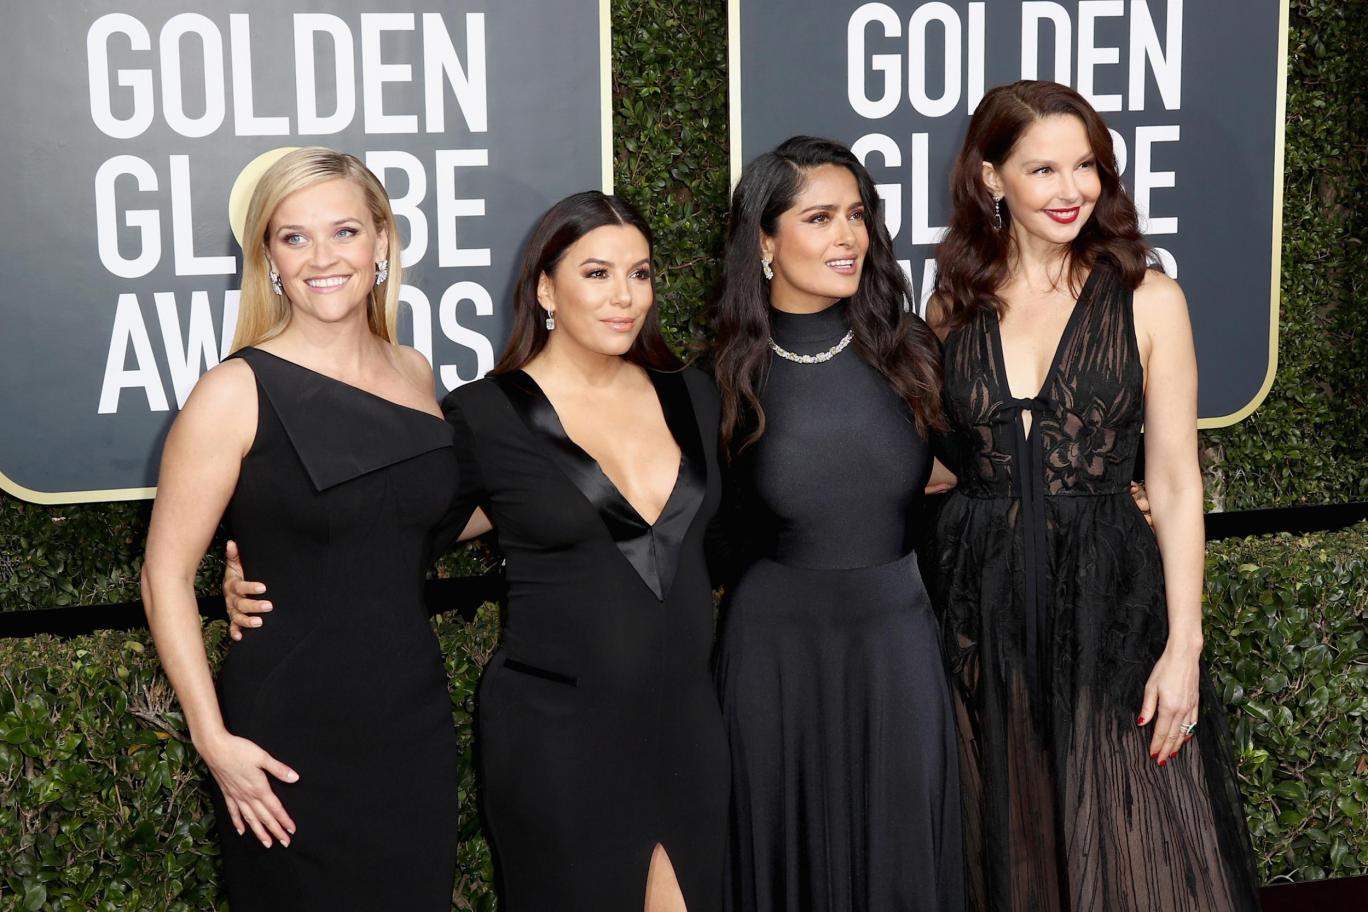 Time’s Up! The 2018 Golden Globes’ Branded In Reclamation, Inclusivity and Purpose